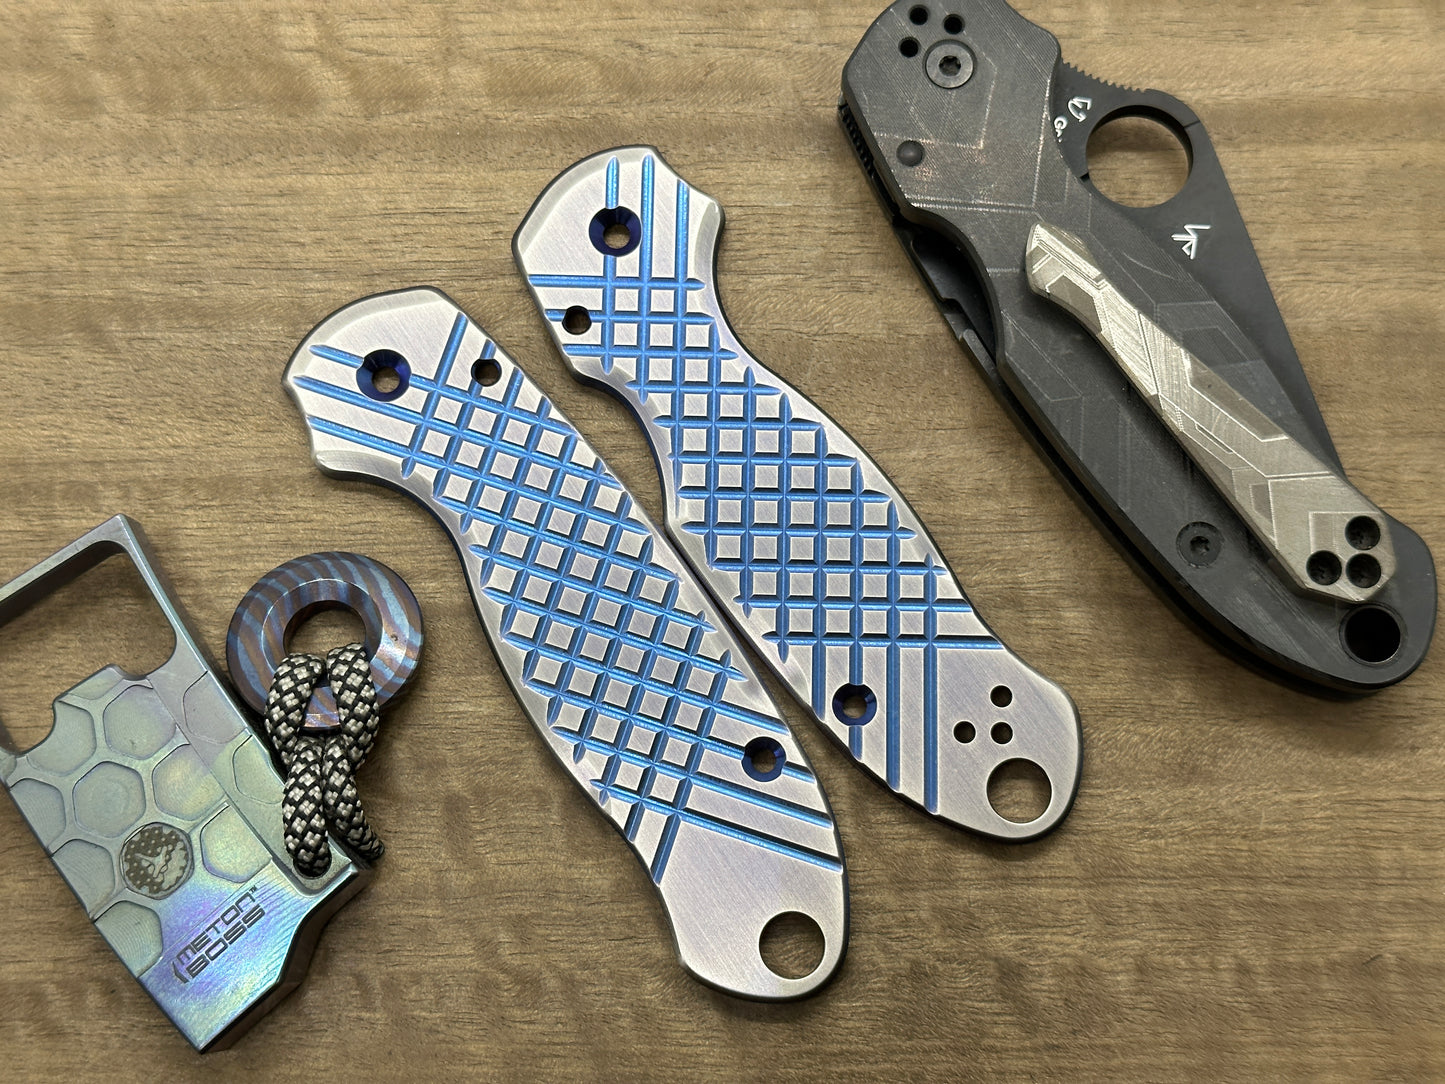 2-Tone BLUE ano & Brushed FRAG cnc milled Titanium scales for Spyderco Para 3